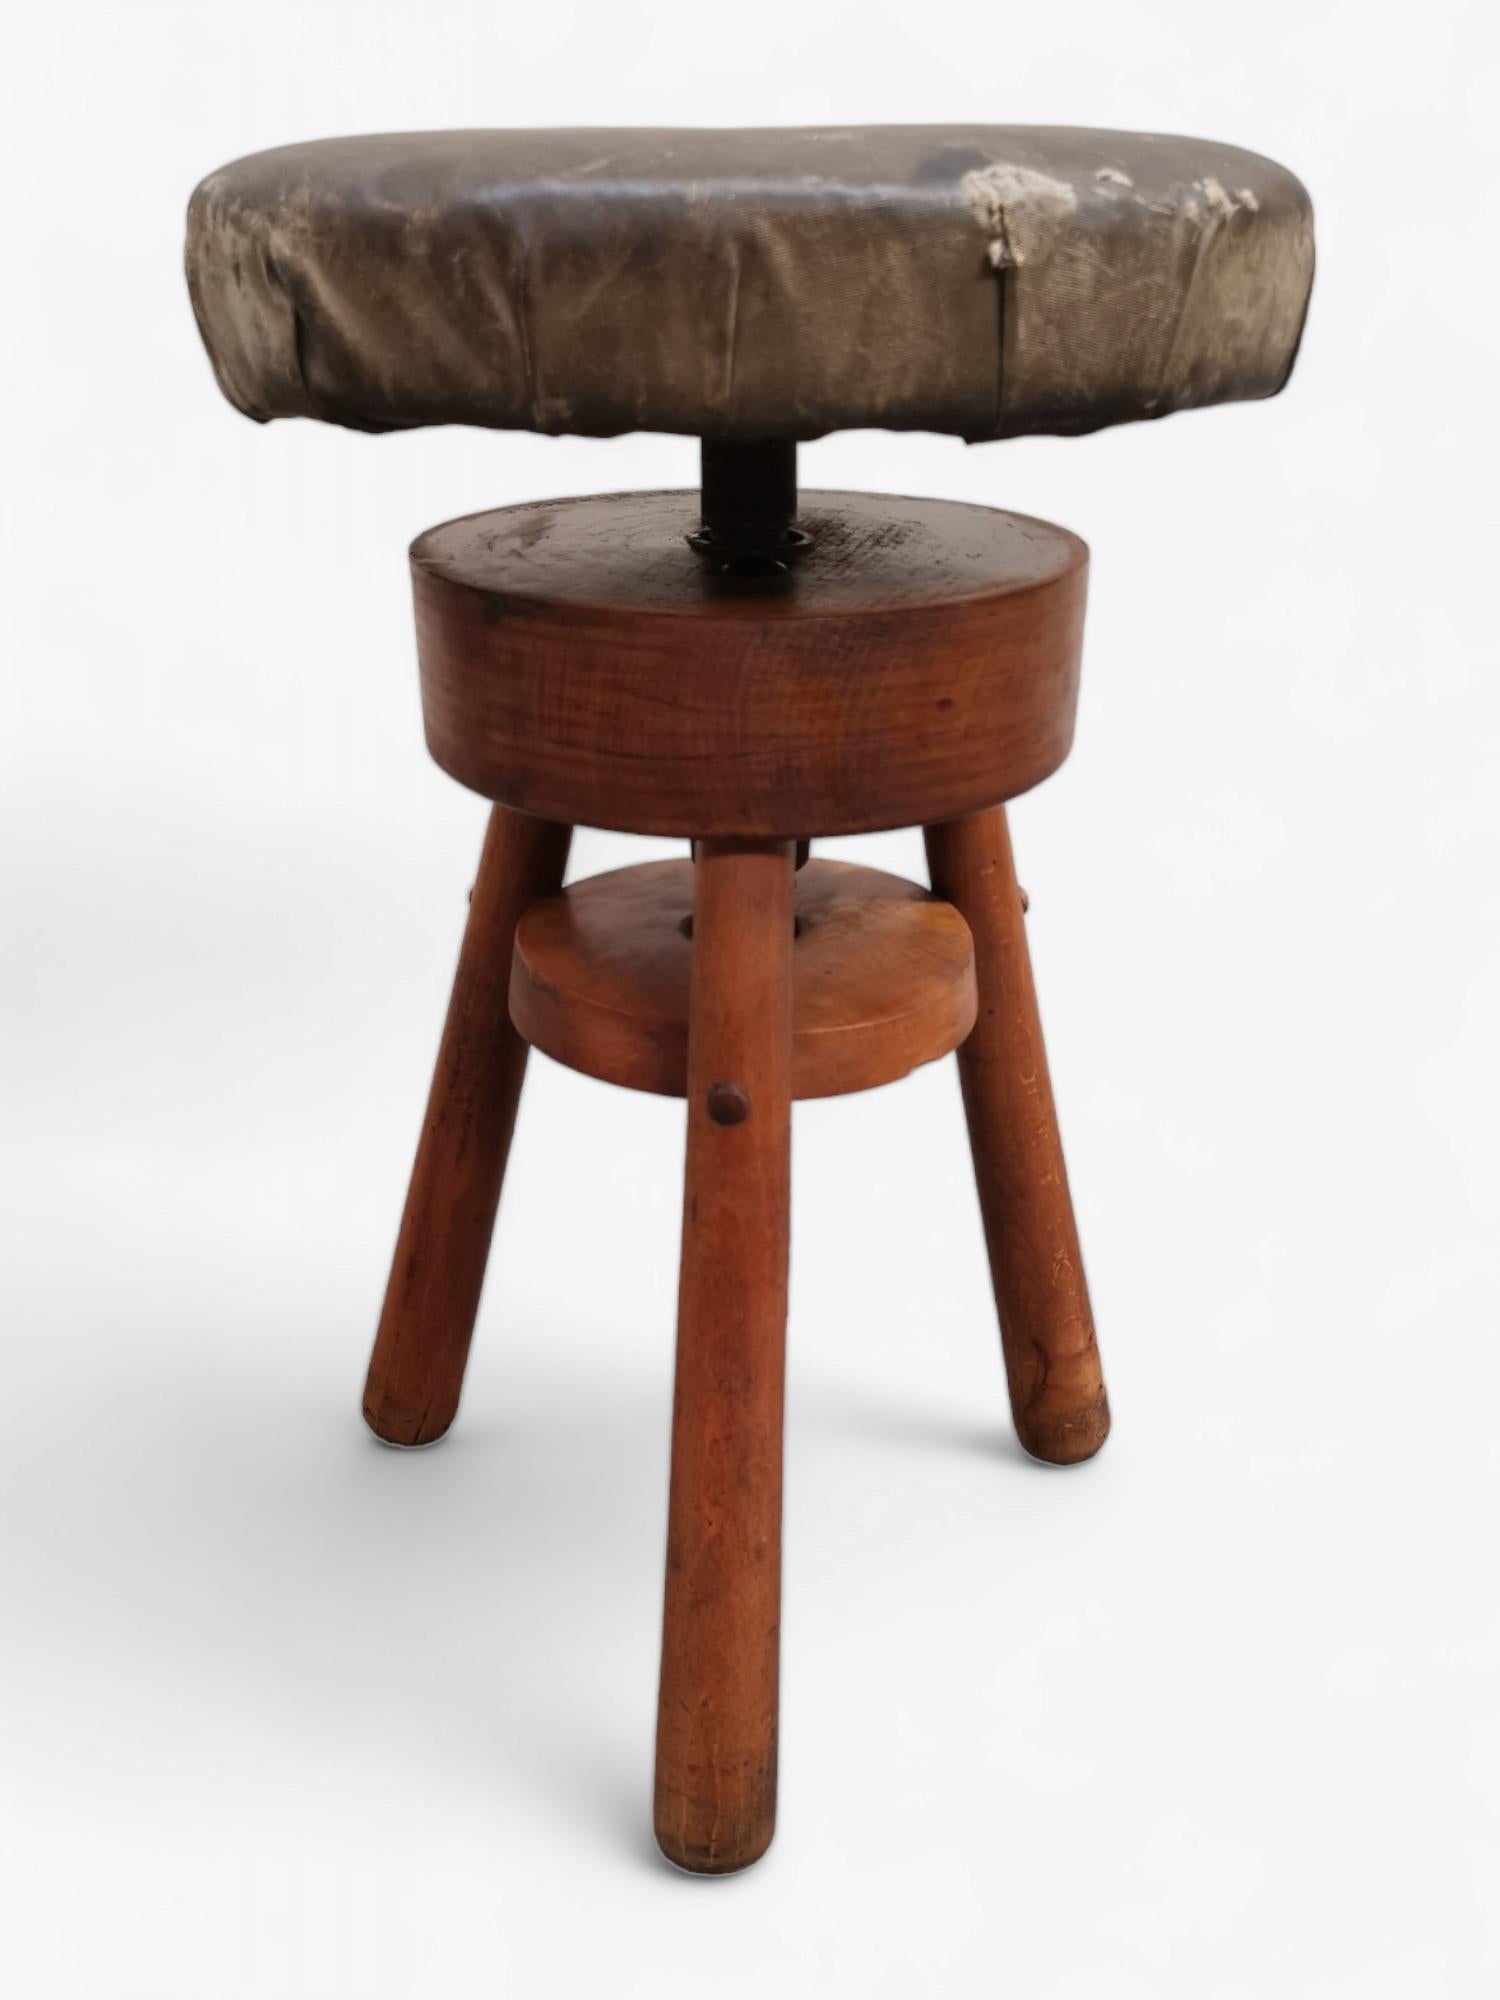 Antique work stool that can be Height adjusted up and down by turning the seat, this chair has been used by the same person for over 40 years, the man worked to draw maps, and chairs is good as it is stable with the 3 legs and heavy.
on top of the